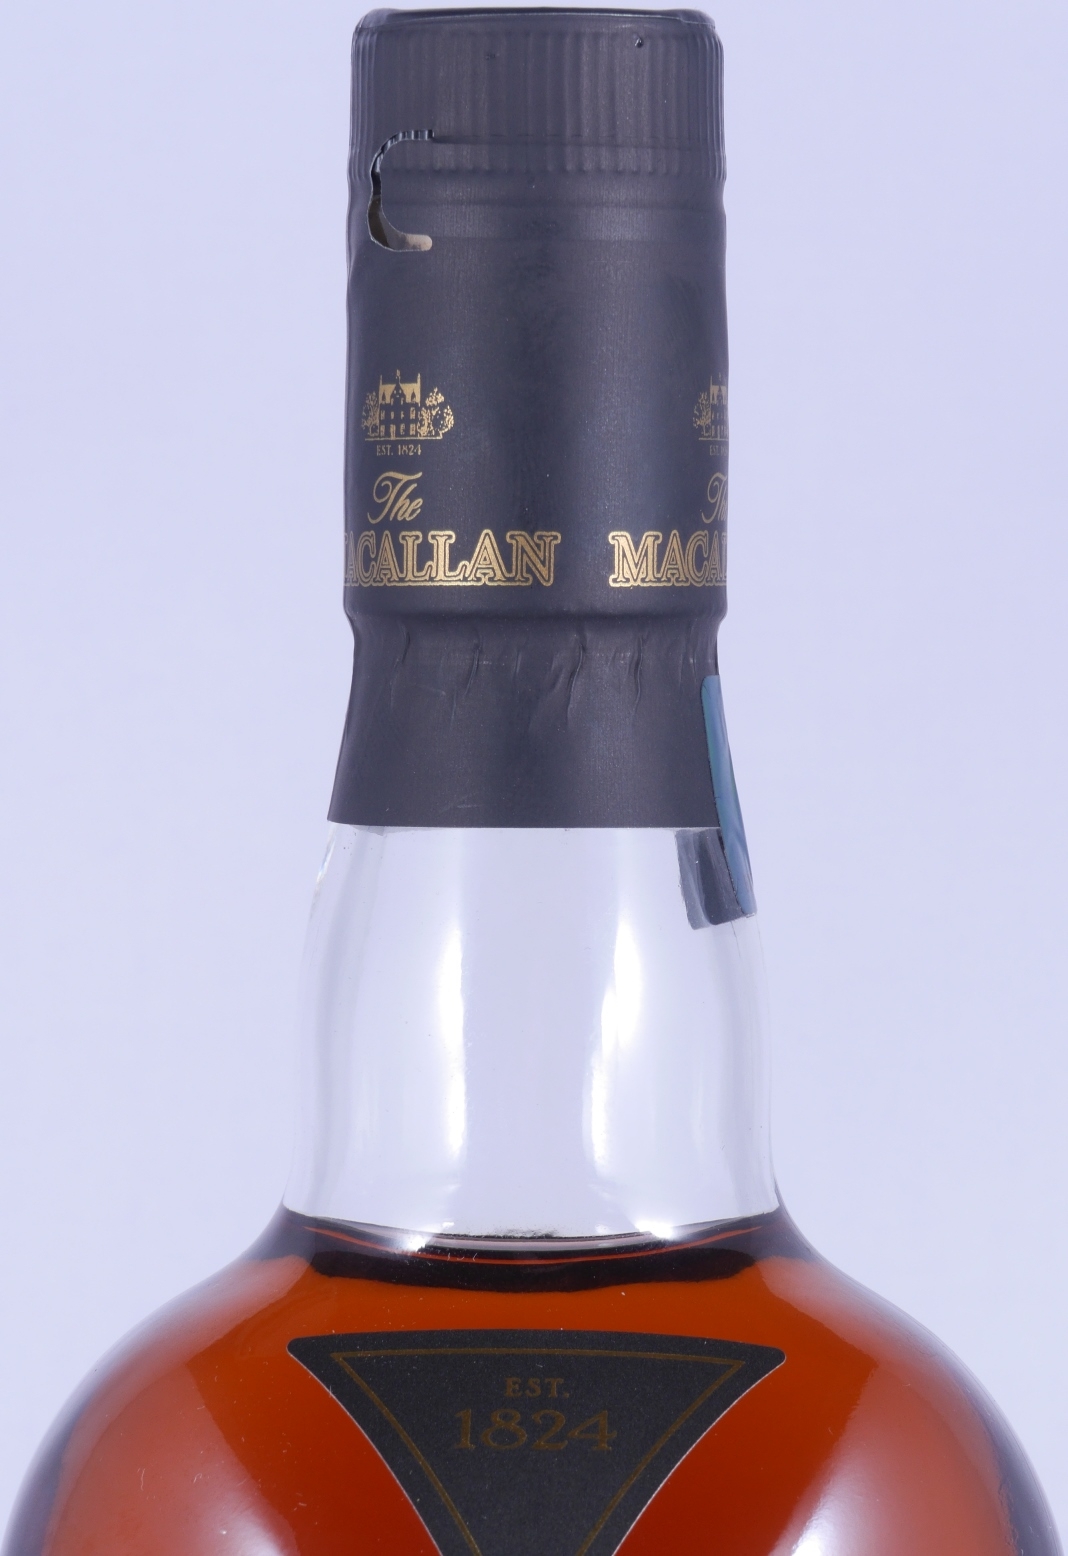 Buy Macallan Estate Reserve Masters Of Photography Capsule Edition Ernie Button Highland Single Malt Scotch Whisky 45 7 Vol At Amcom Secure Online